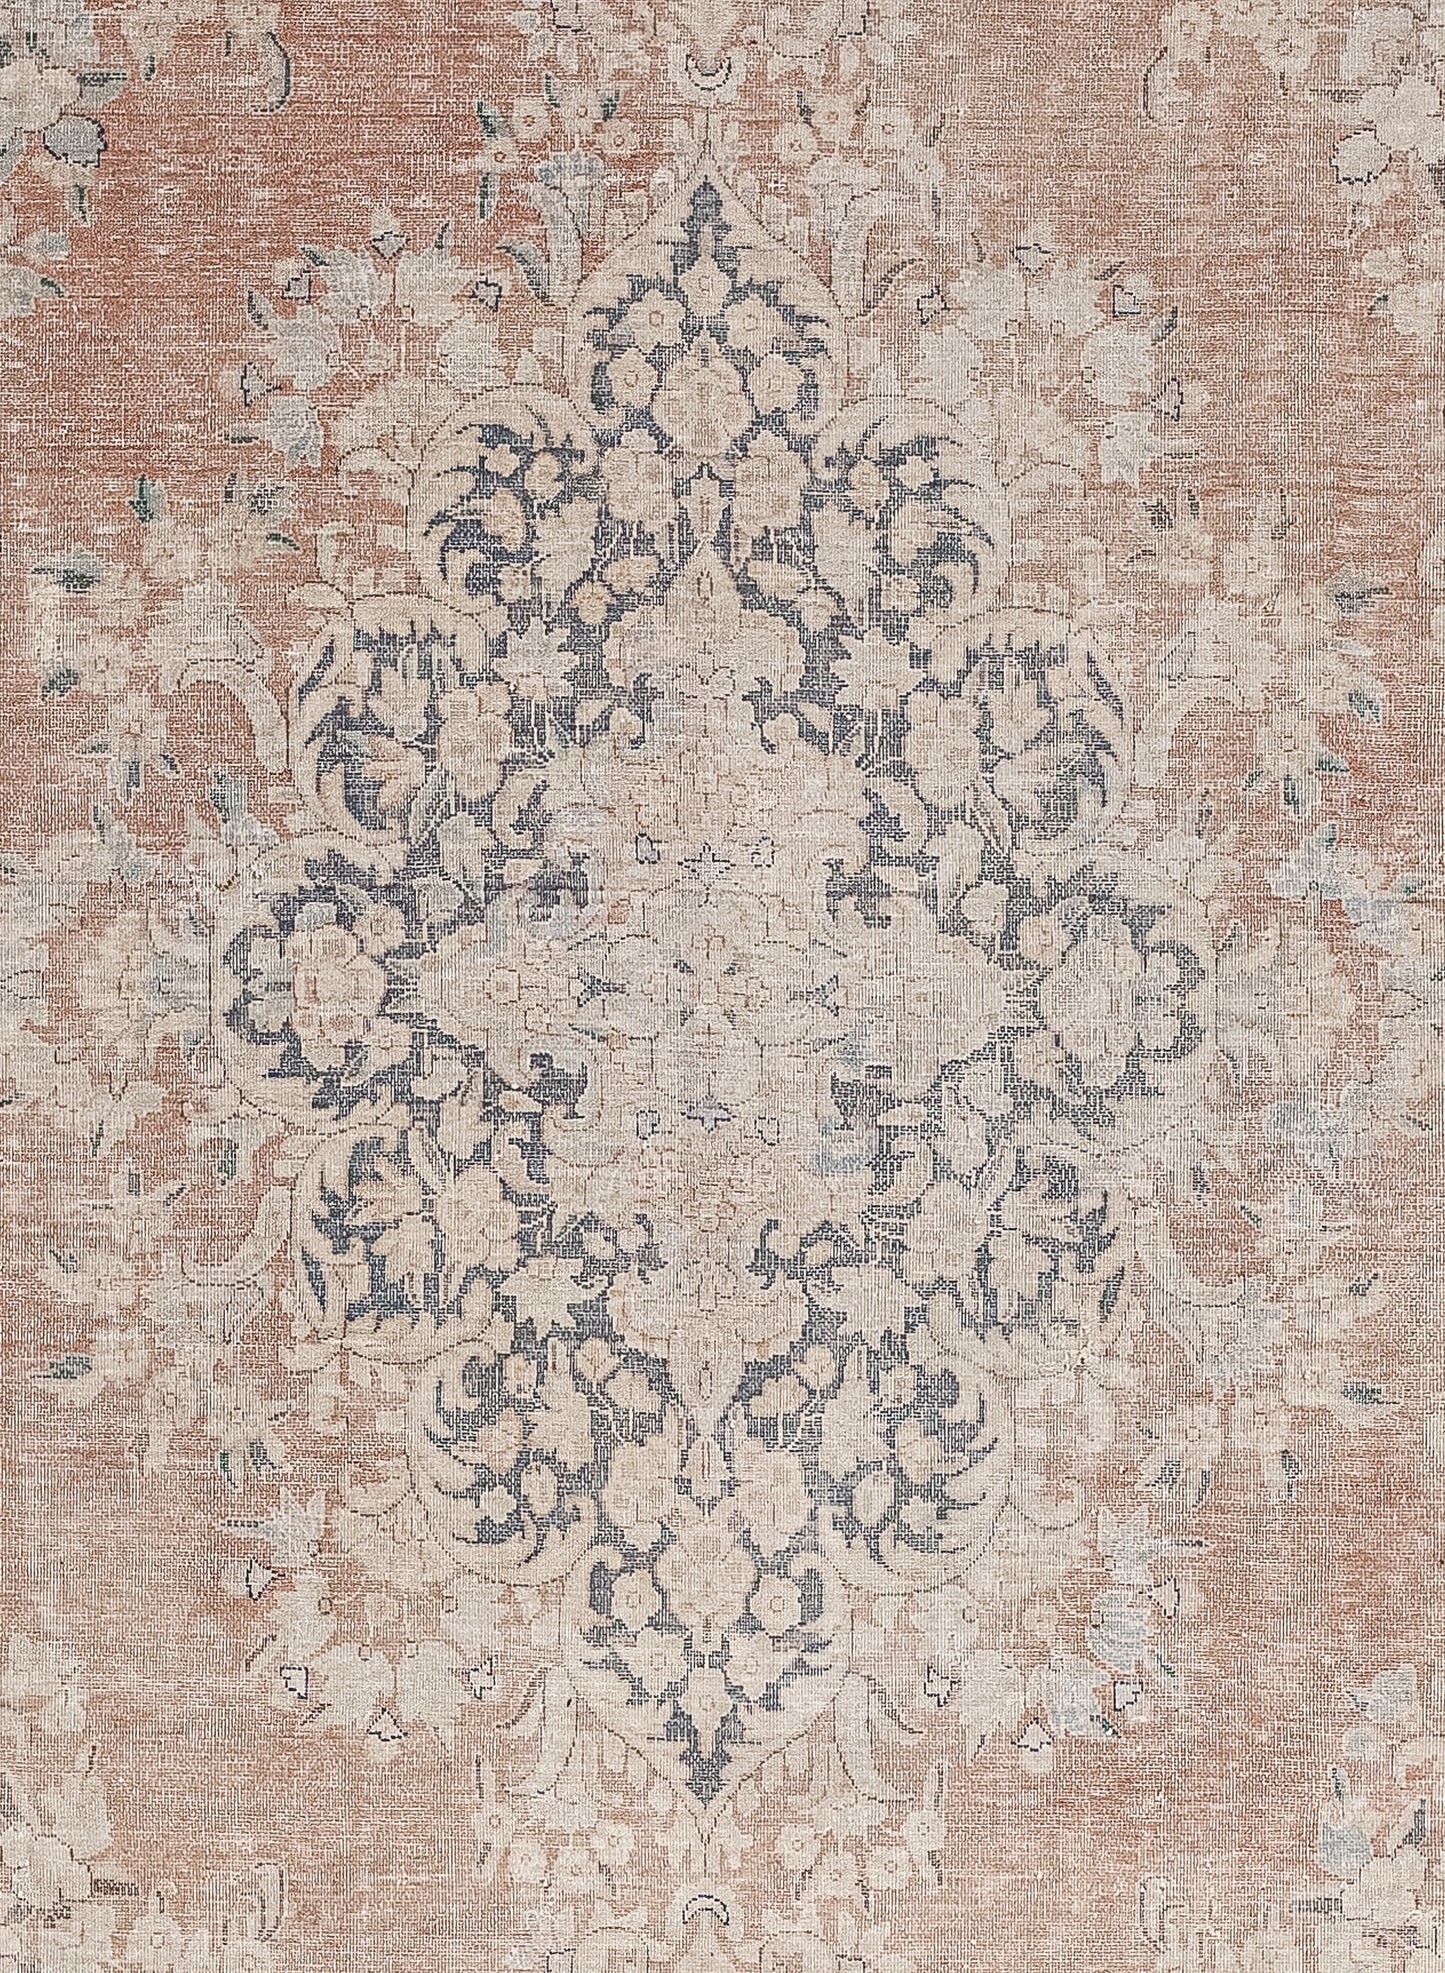 The center of the rug shows a lozenge form made up long leaves and flower heads, all arranged symmetrically.